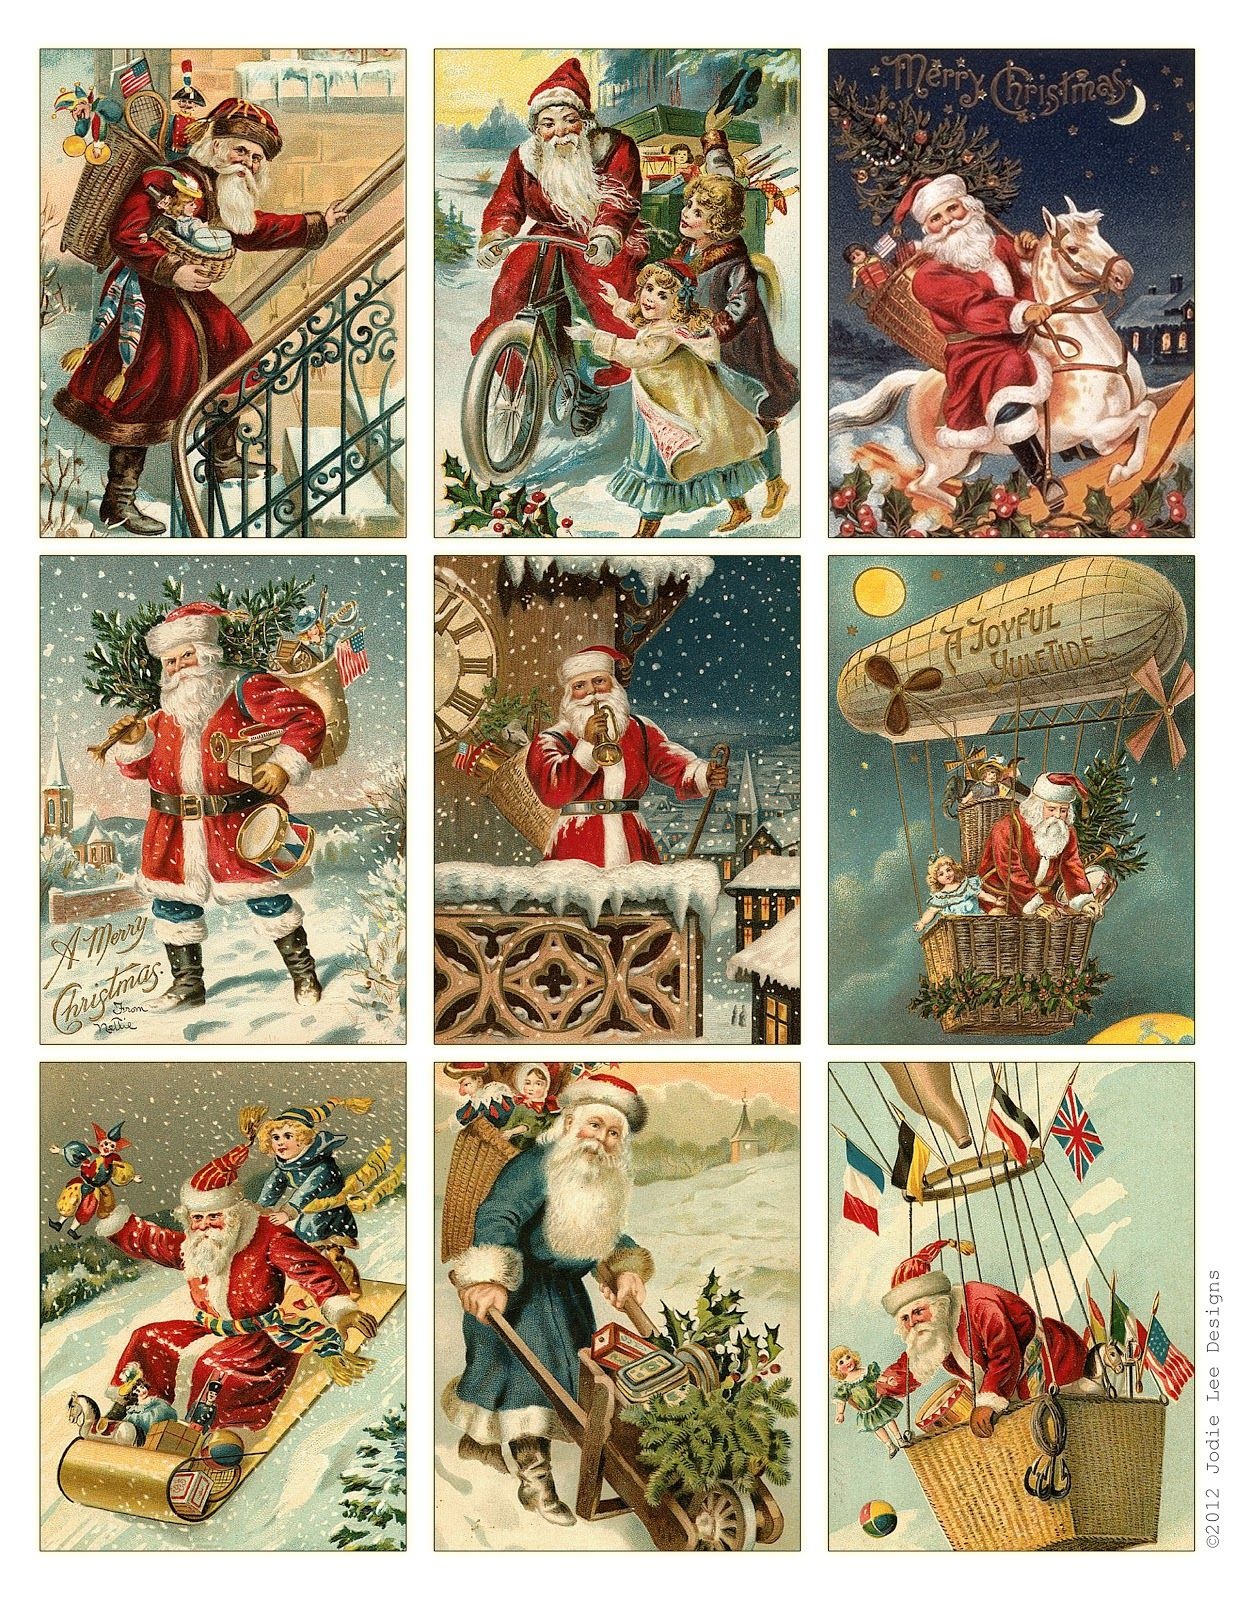 Free To Download! Printable Vintage Santa Tags Or Cards. | Free - Free Printable Vintage Christmas Tags For Gifts